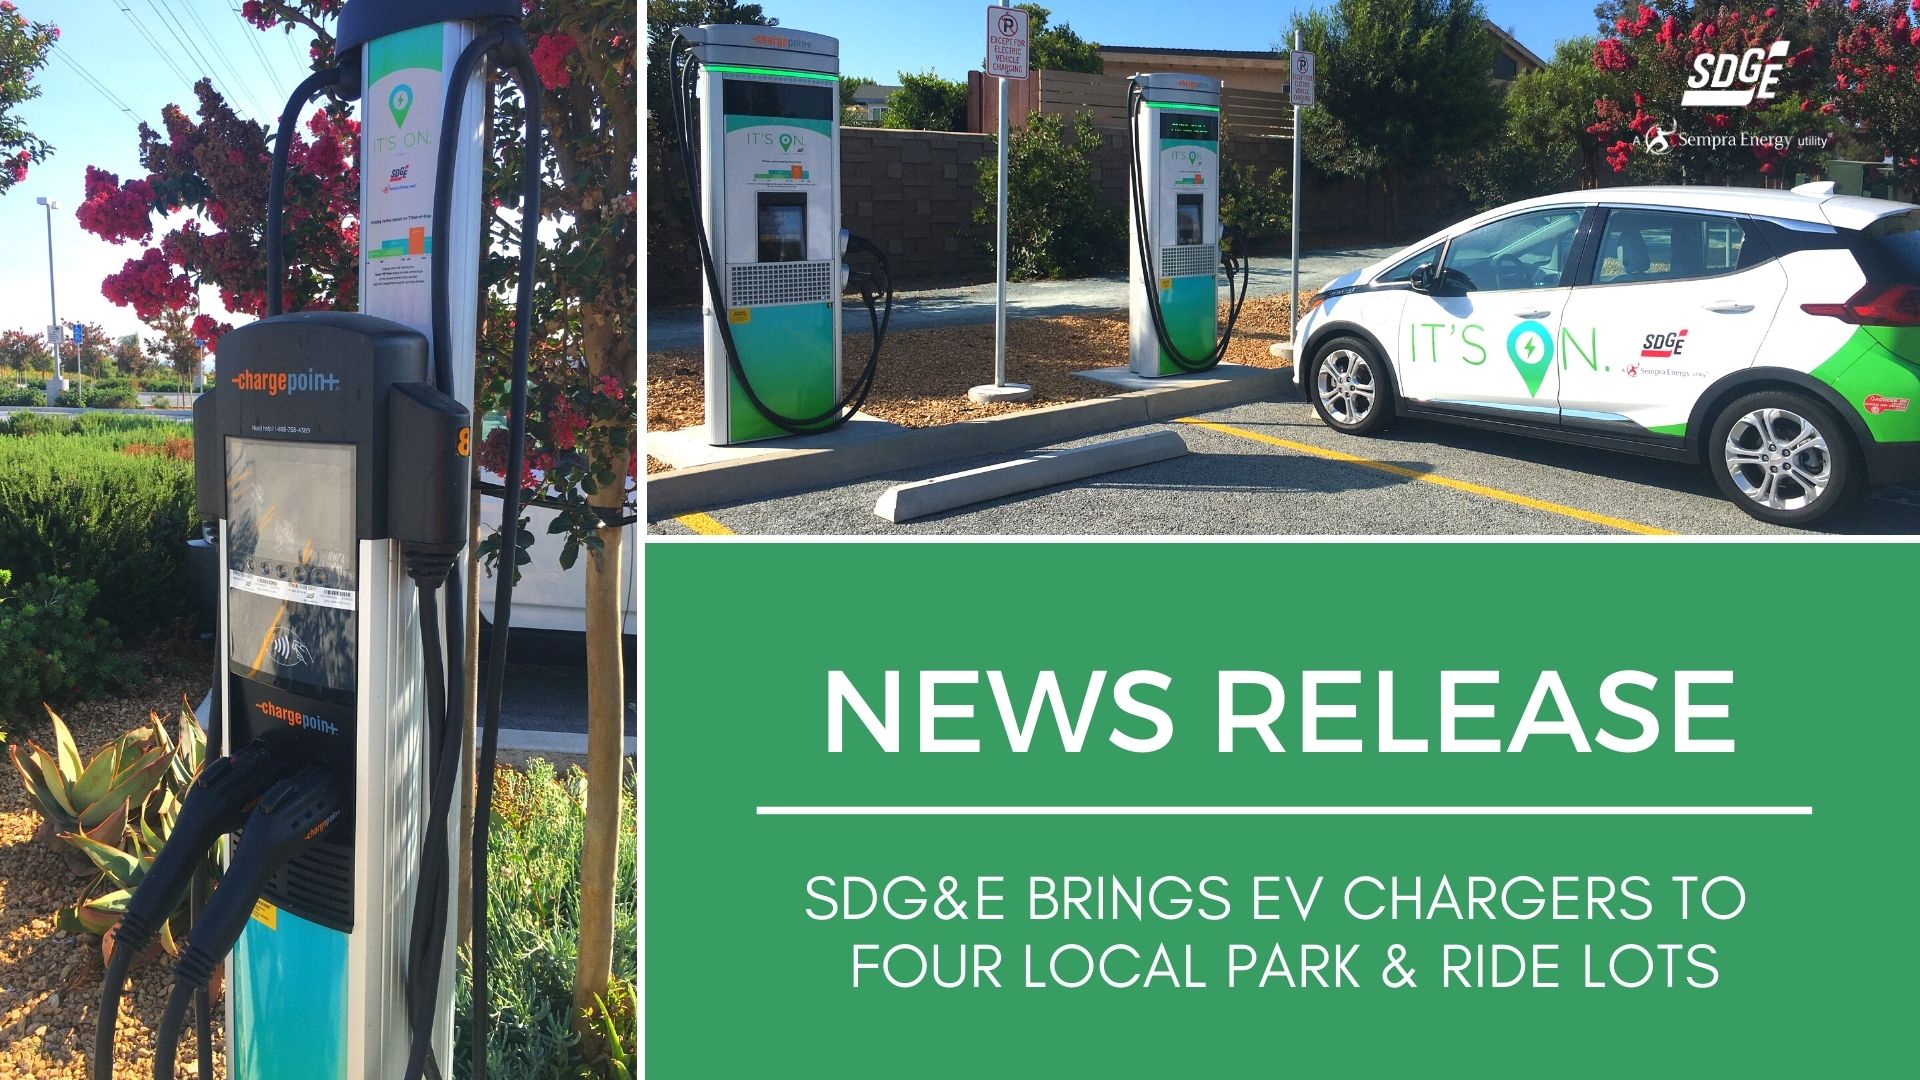 SDG&E Brings EV Chargers to Four Local Park & Ride Lots